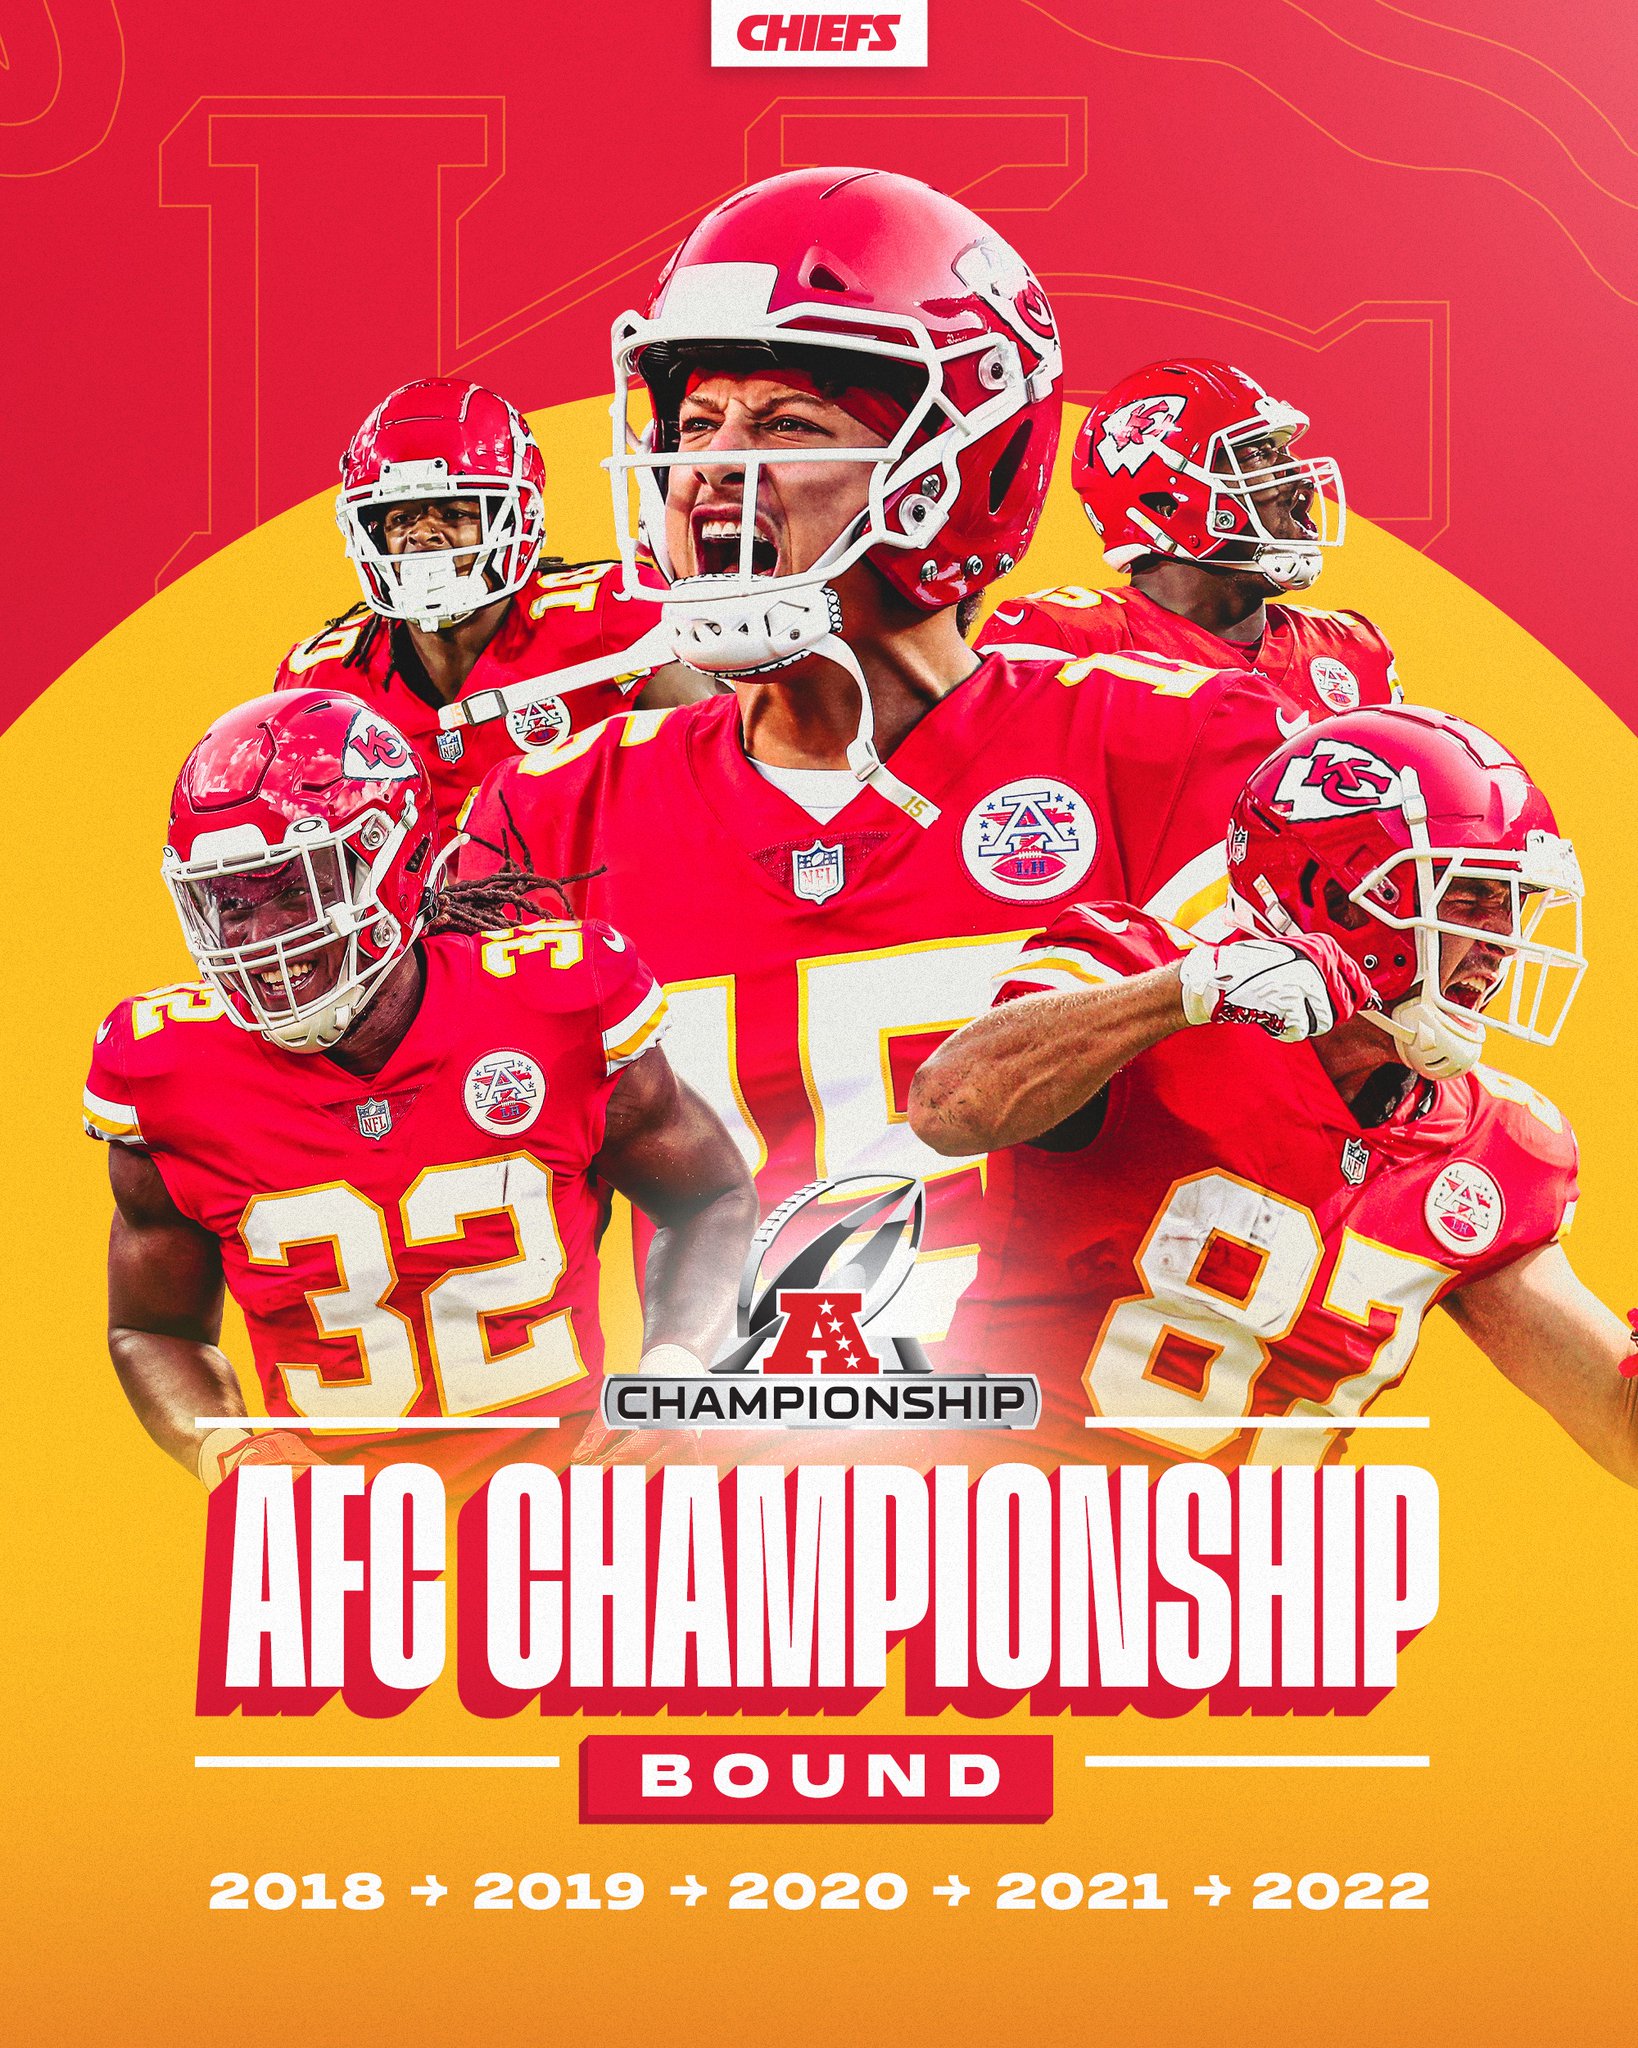 The Kansas City Chiefs are headed to their 3rd Super Bowl in 4